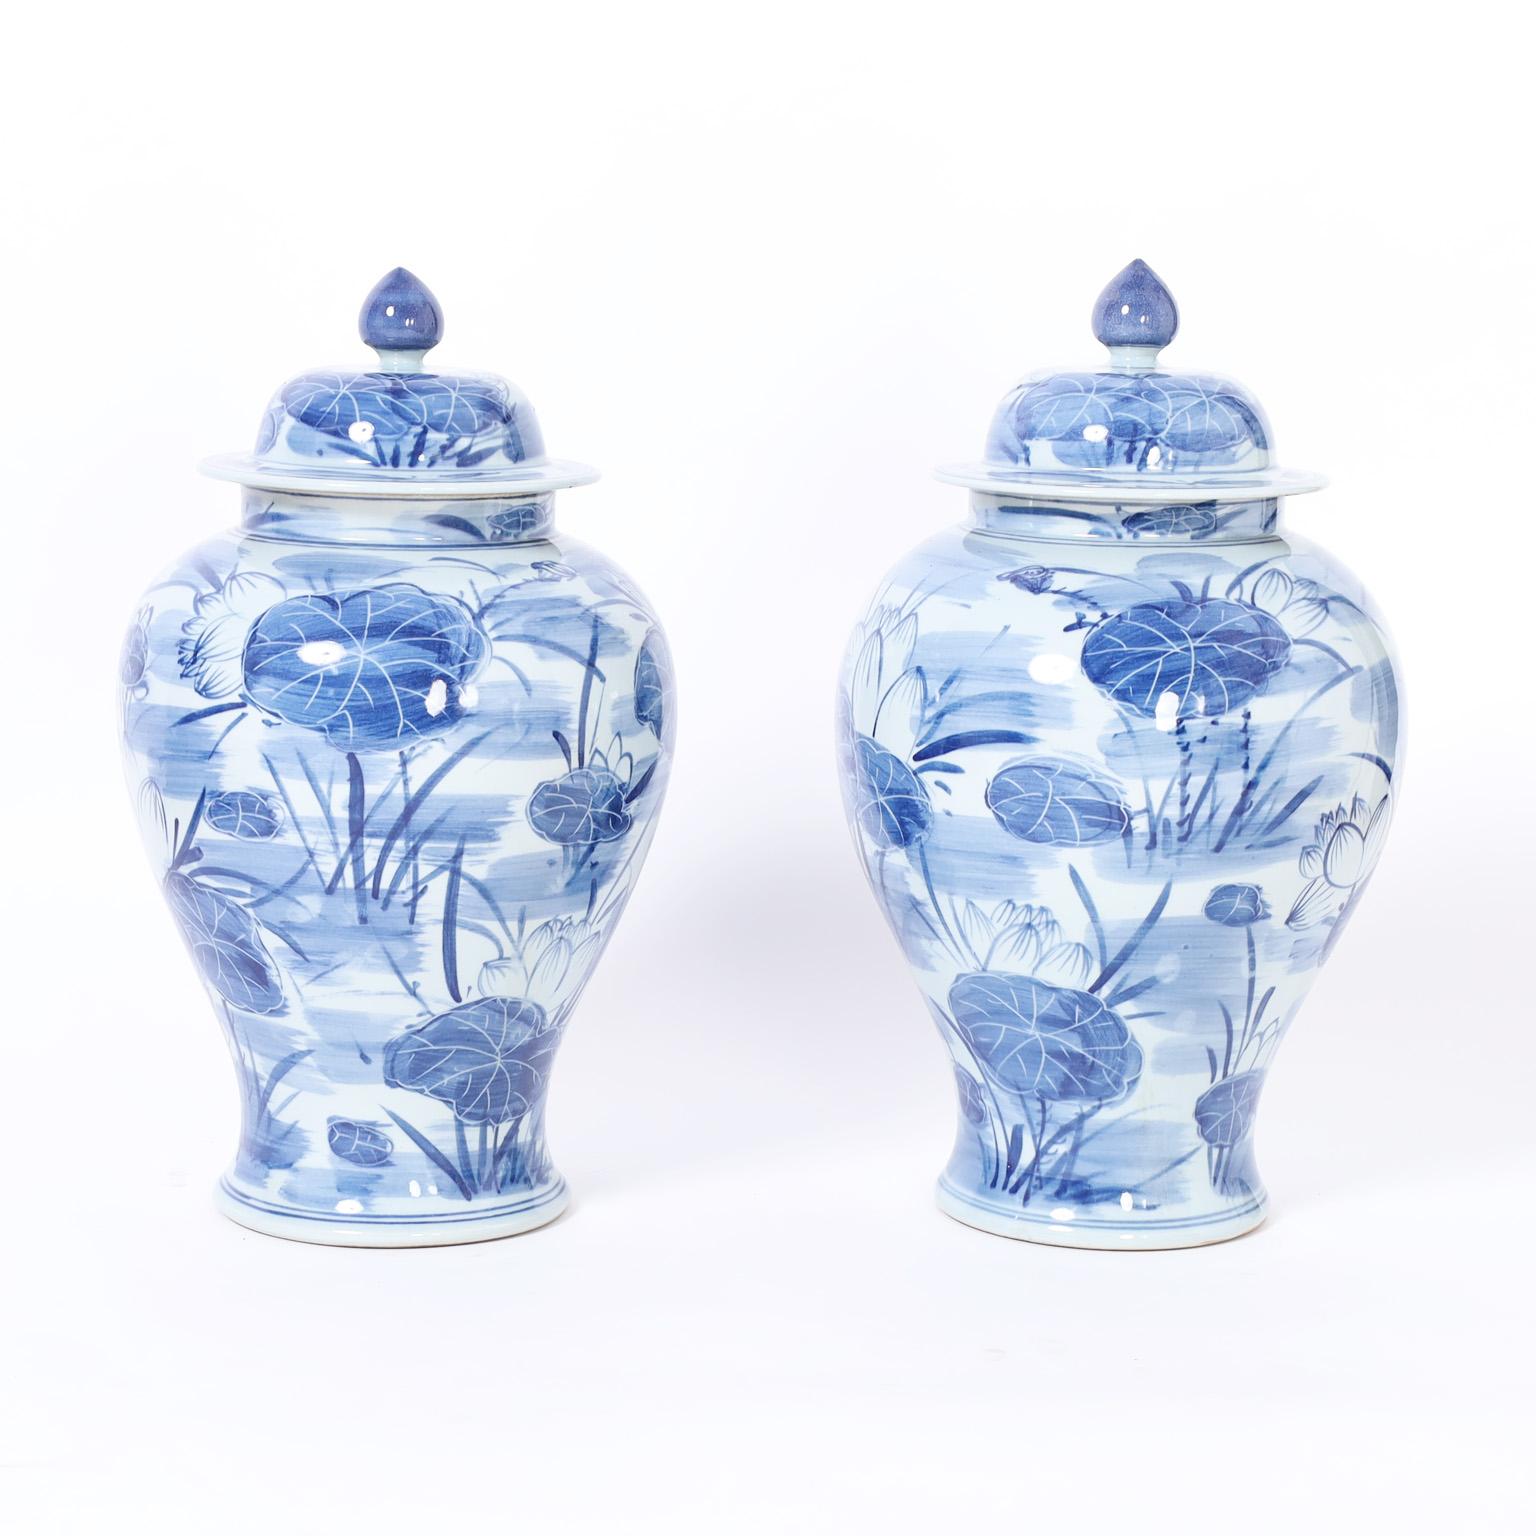 Charming pair of Chinese blue and white urns crafted in porcelain in a classic form with removable lids and hand decorated with lilies and flowers.